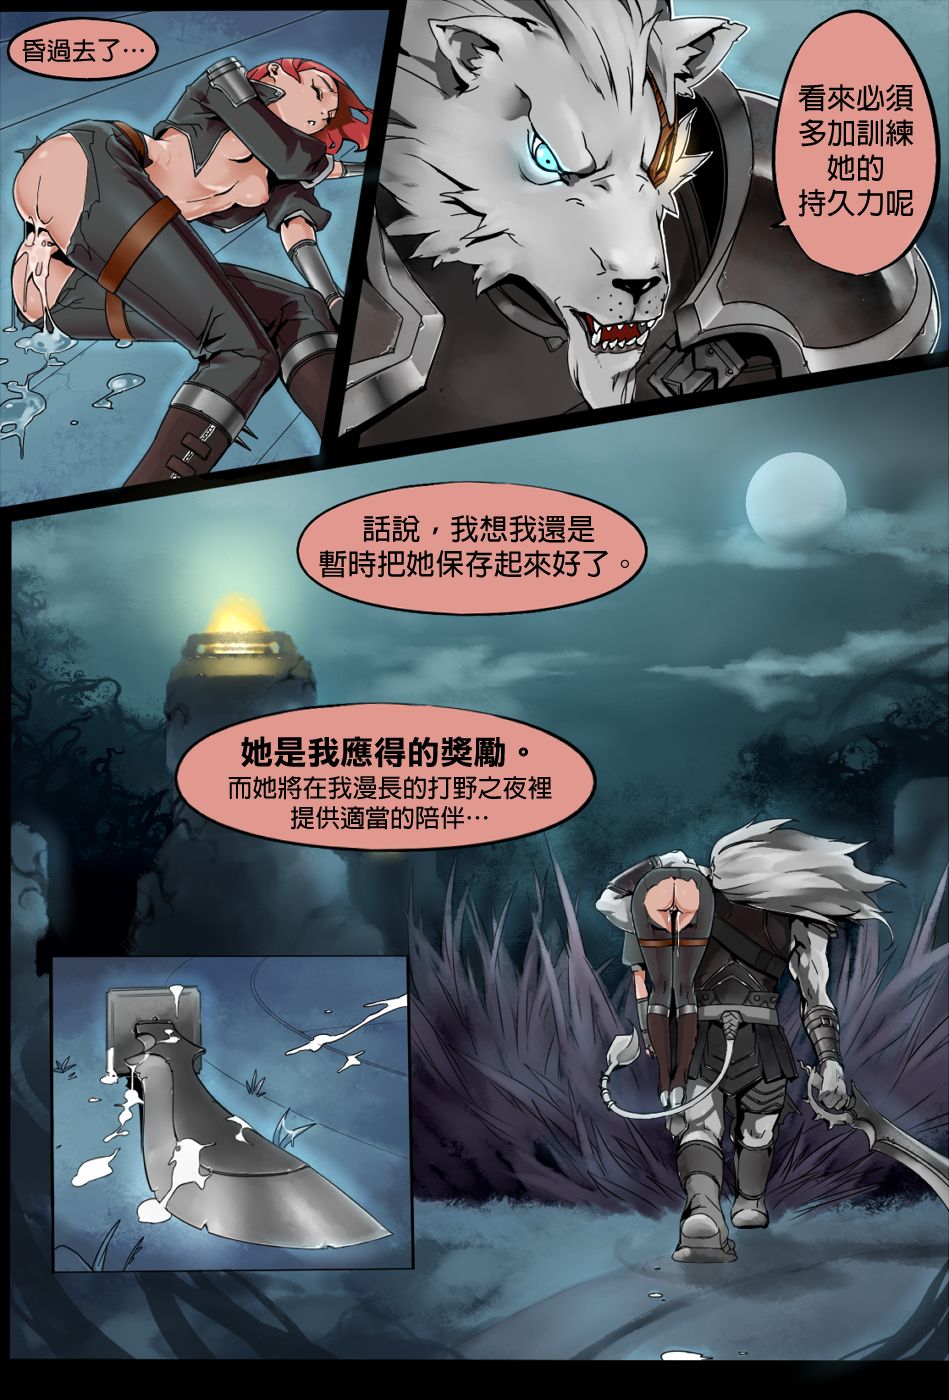 [OptionalTypo] Twisted Intent Vol.1 (League of Legends)[Chinese][final個人漢化] [OptionalTypo] Twisted Intent Vol.1 (League of Legends)[final個人漢化]